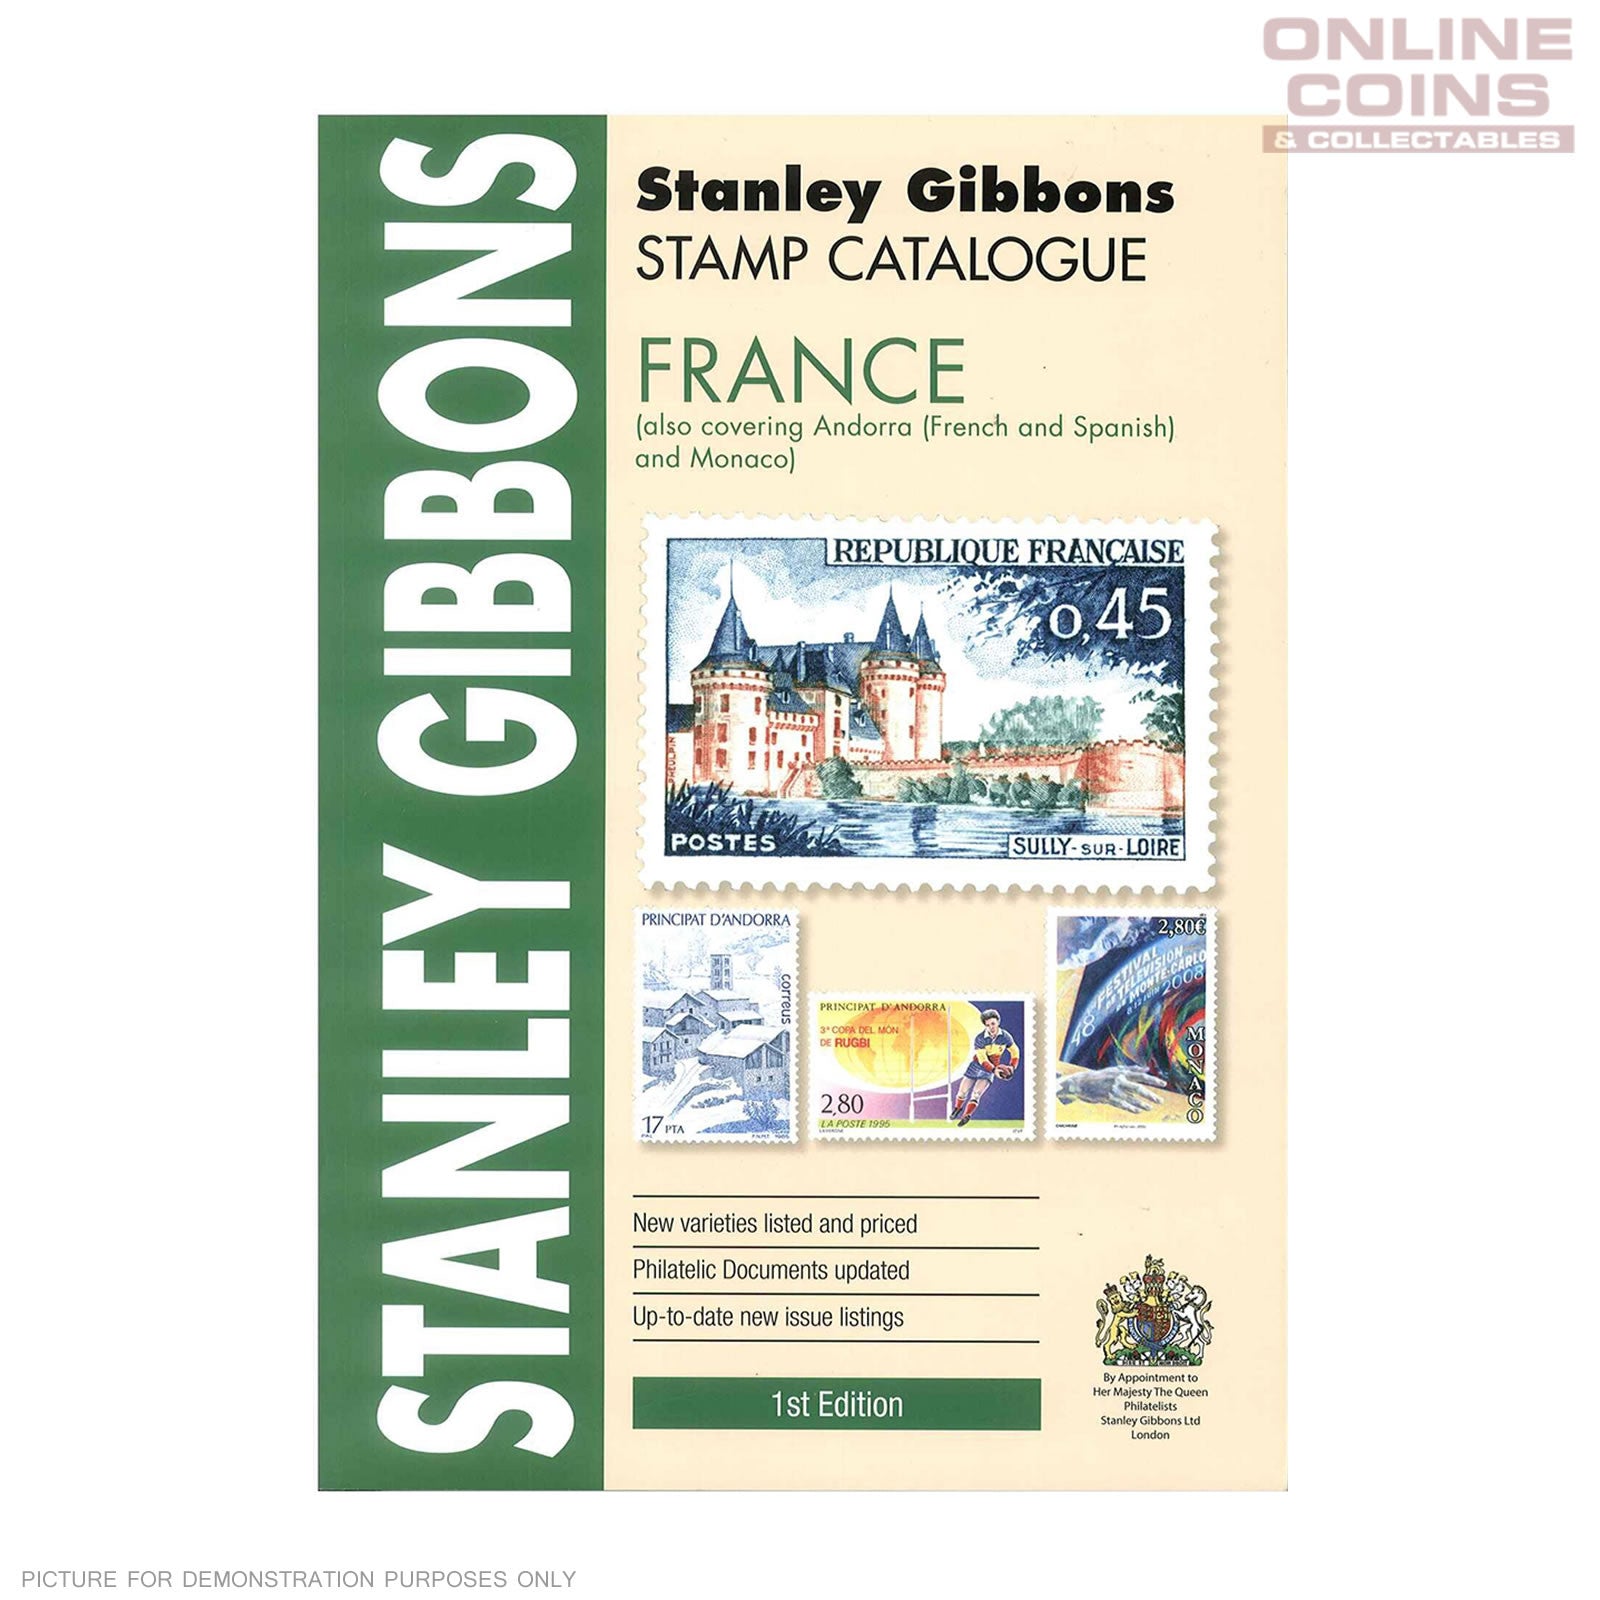 2015 Stanley Gibbons - Stamp Catalogue France 1st Edition Soft Cover Book